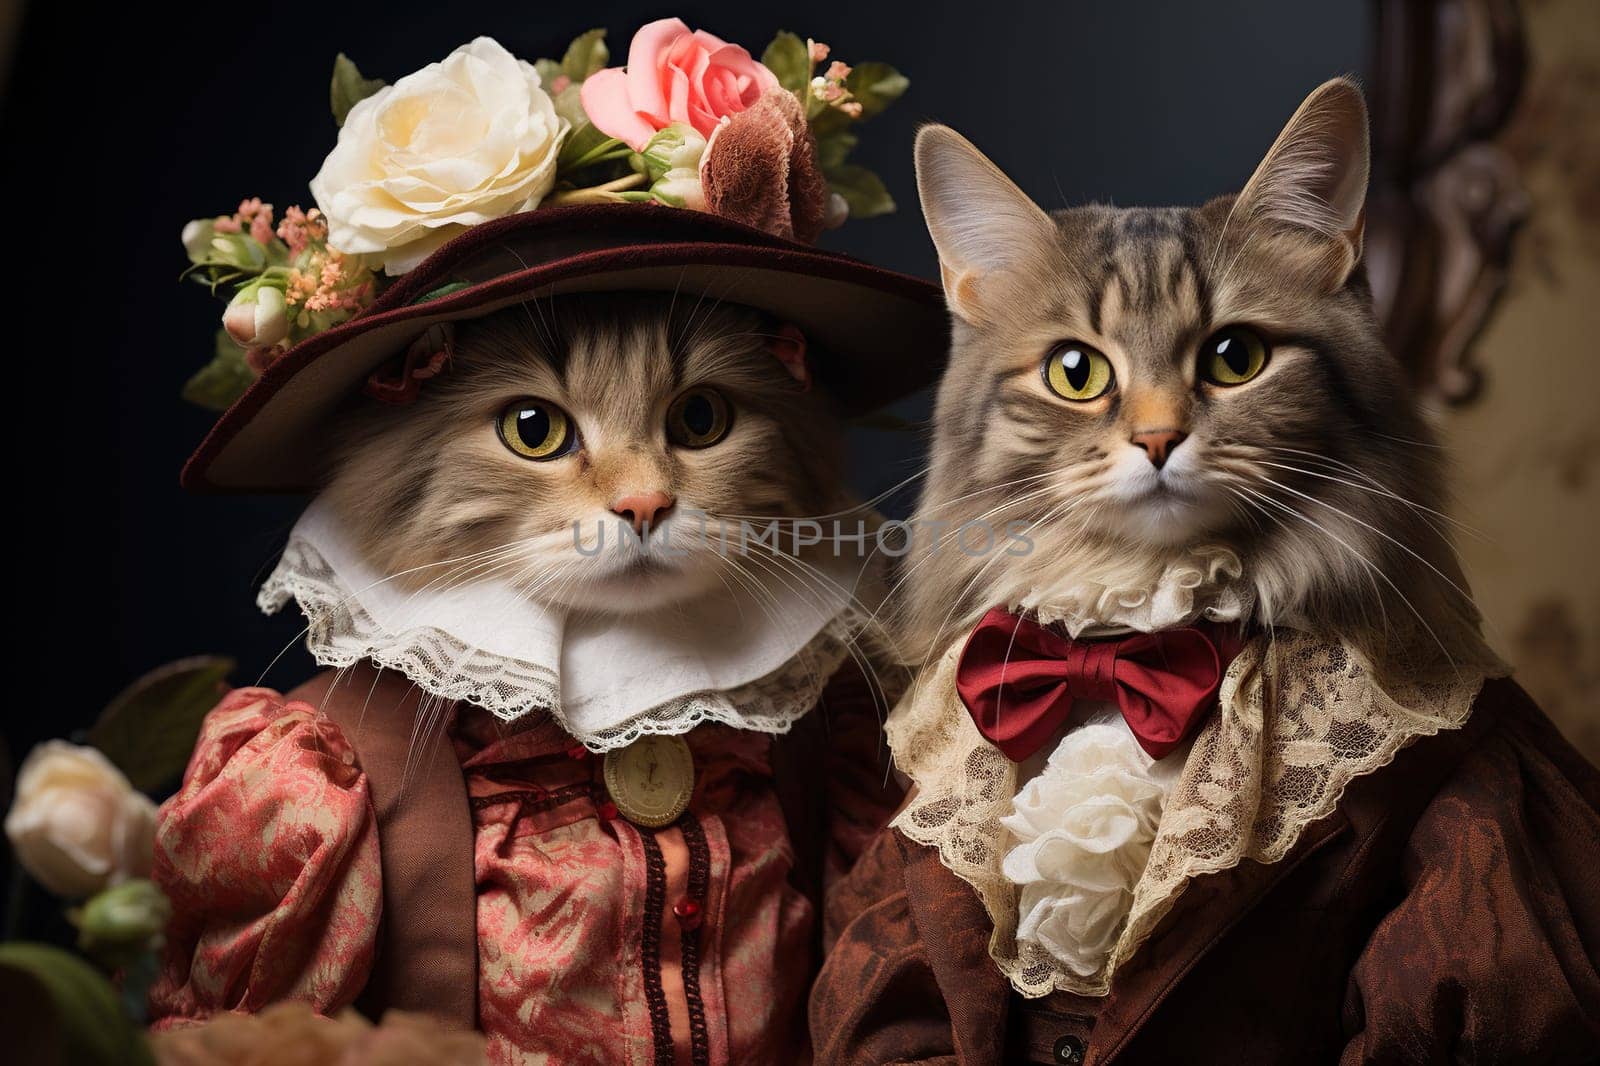 Family portrait of cats dressed in Victorian style.